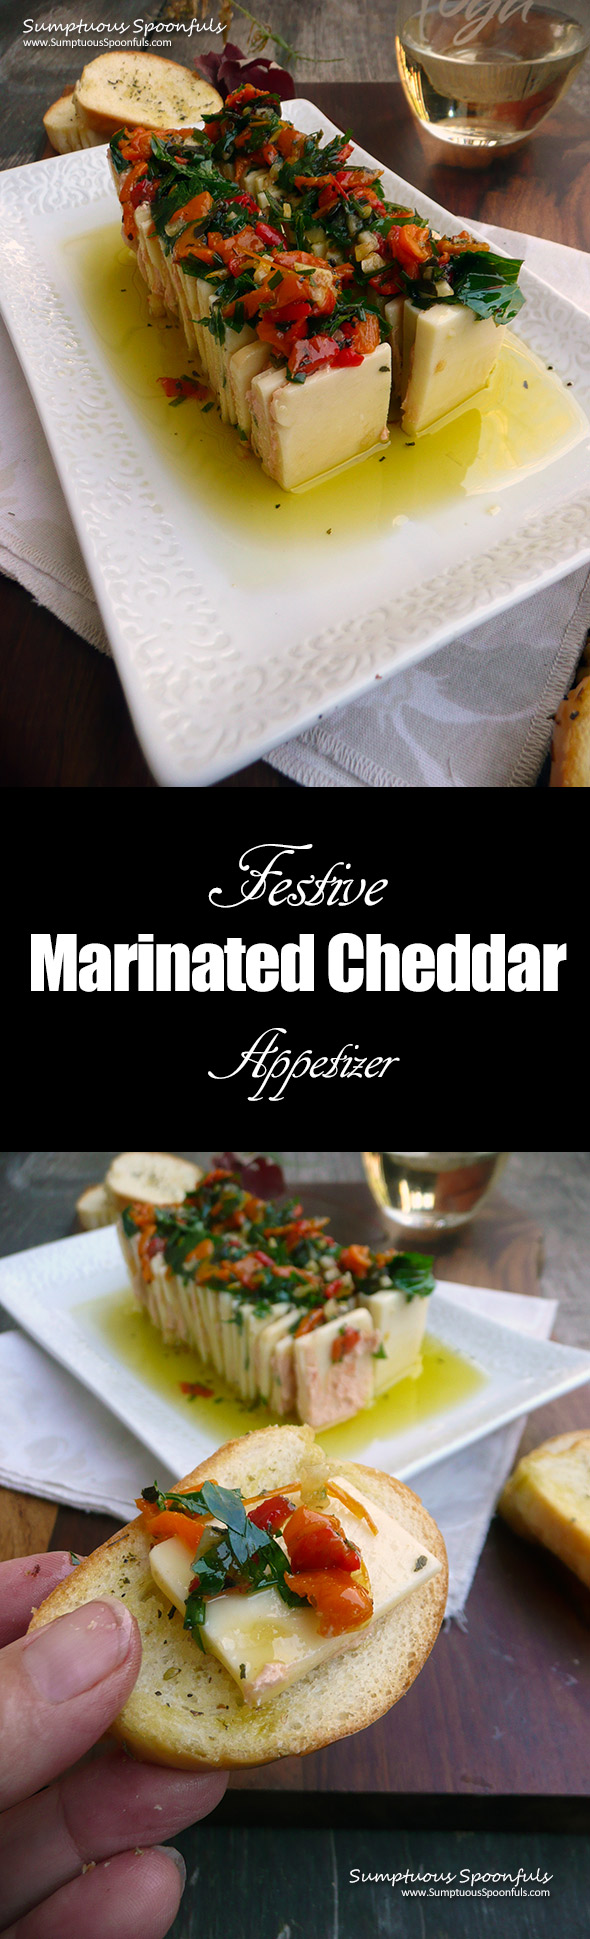 Festive Marinated Cheddar Cheese Appetizer ~ Sumptuous Spoonfuls #holiday #appetizer #recipe